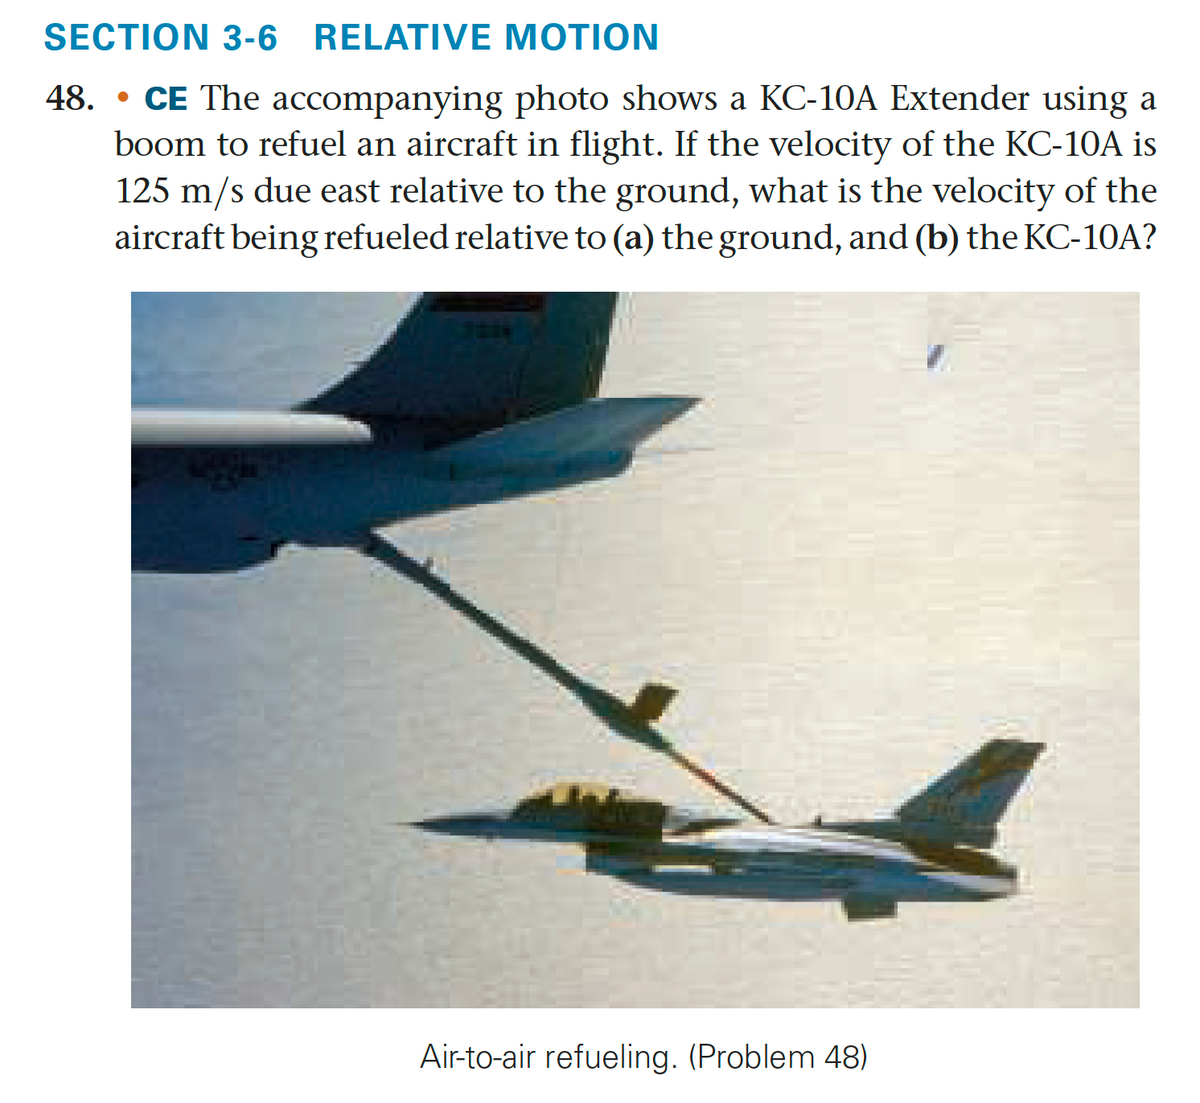 SECTION 3-6 RELATIVE MOTION
48. CE The accompanying photo shows a KC-10A Extender using a
boom to refuel an aircraft in flight. If the velocity of the KC-10A is
125 m/s due east relative to the ground, what is the velocity of the
aircraft being refueled relative to (a) the ground, and (b) the KC-10A?
Air-to-air refueling. (Problem 48)